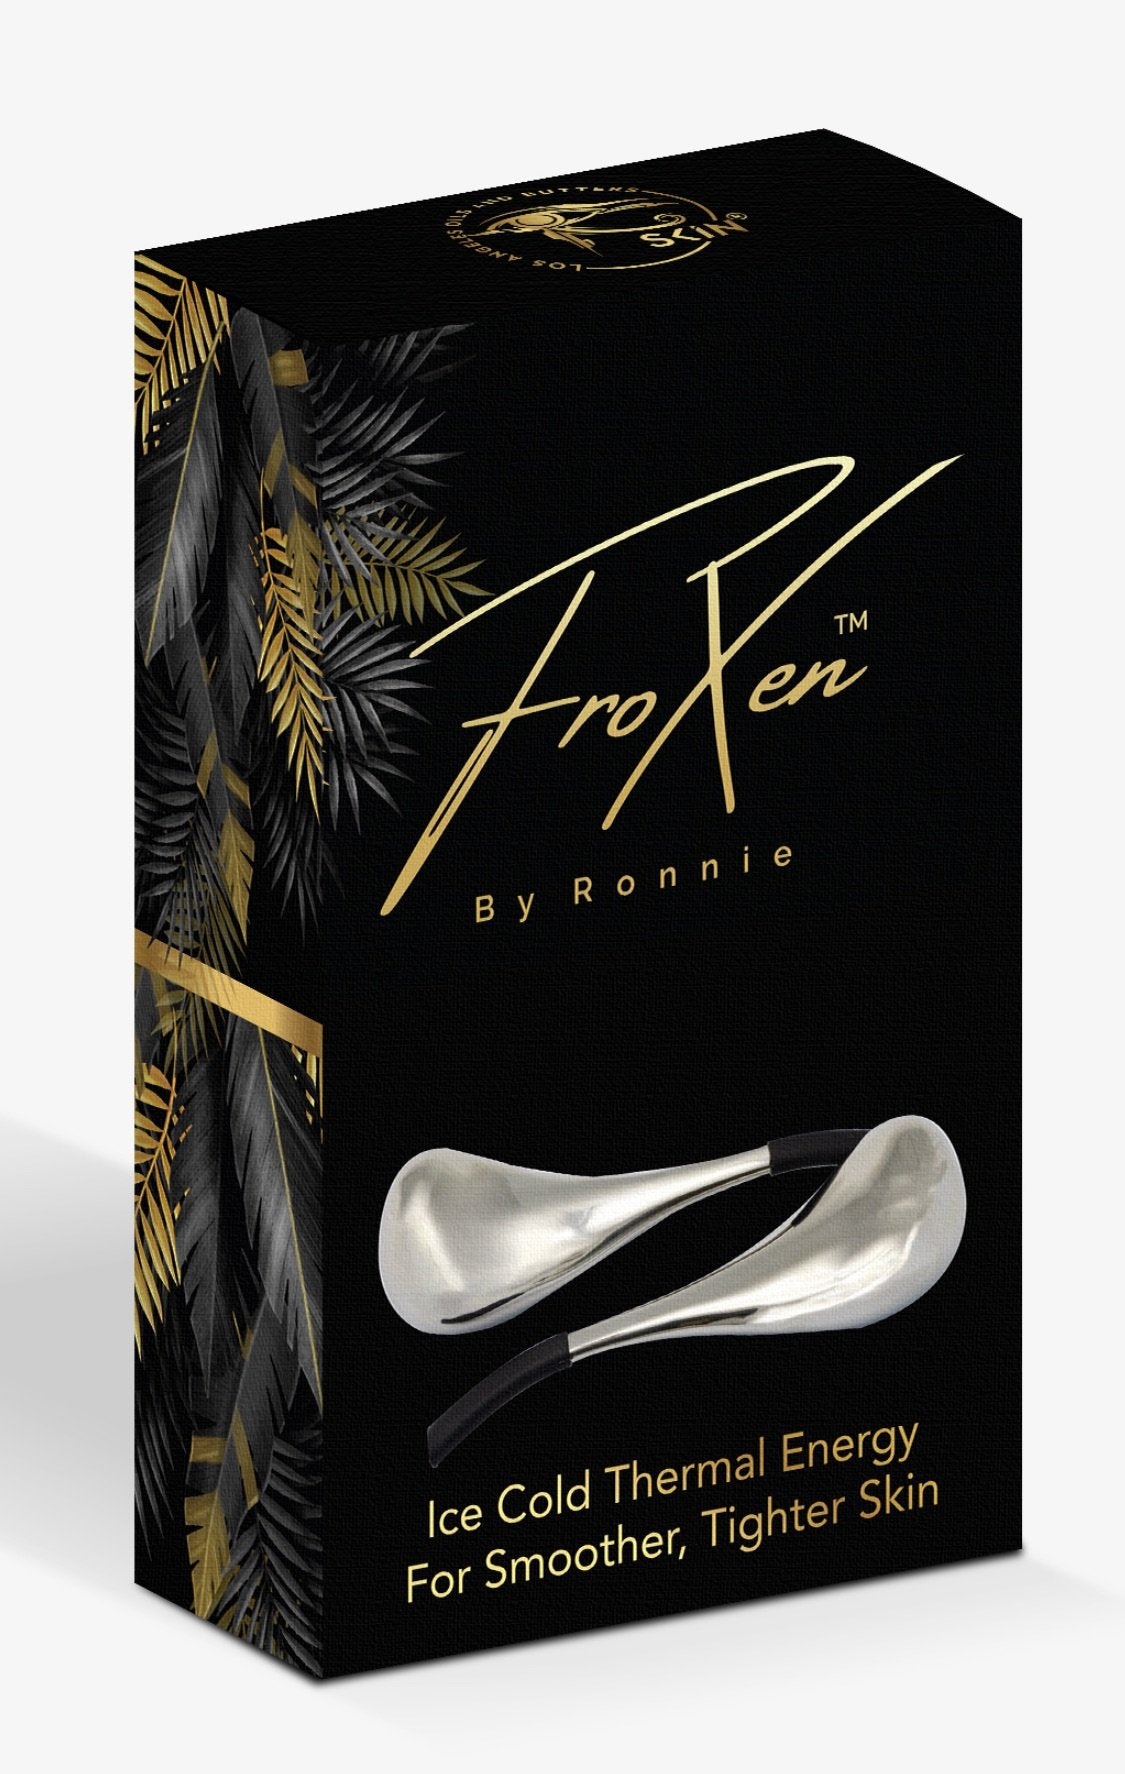 FroXen: By Ronnie - Hyaluronic Acid Sheet Mask, Globes & Hyaluronic Acid Liquid Ice Drops  ⬆️